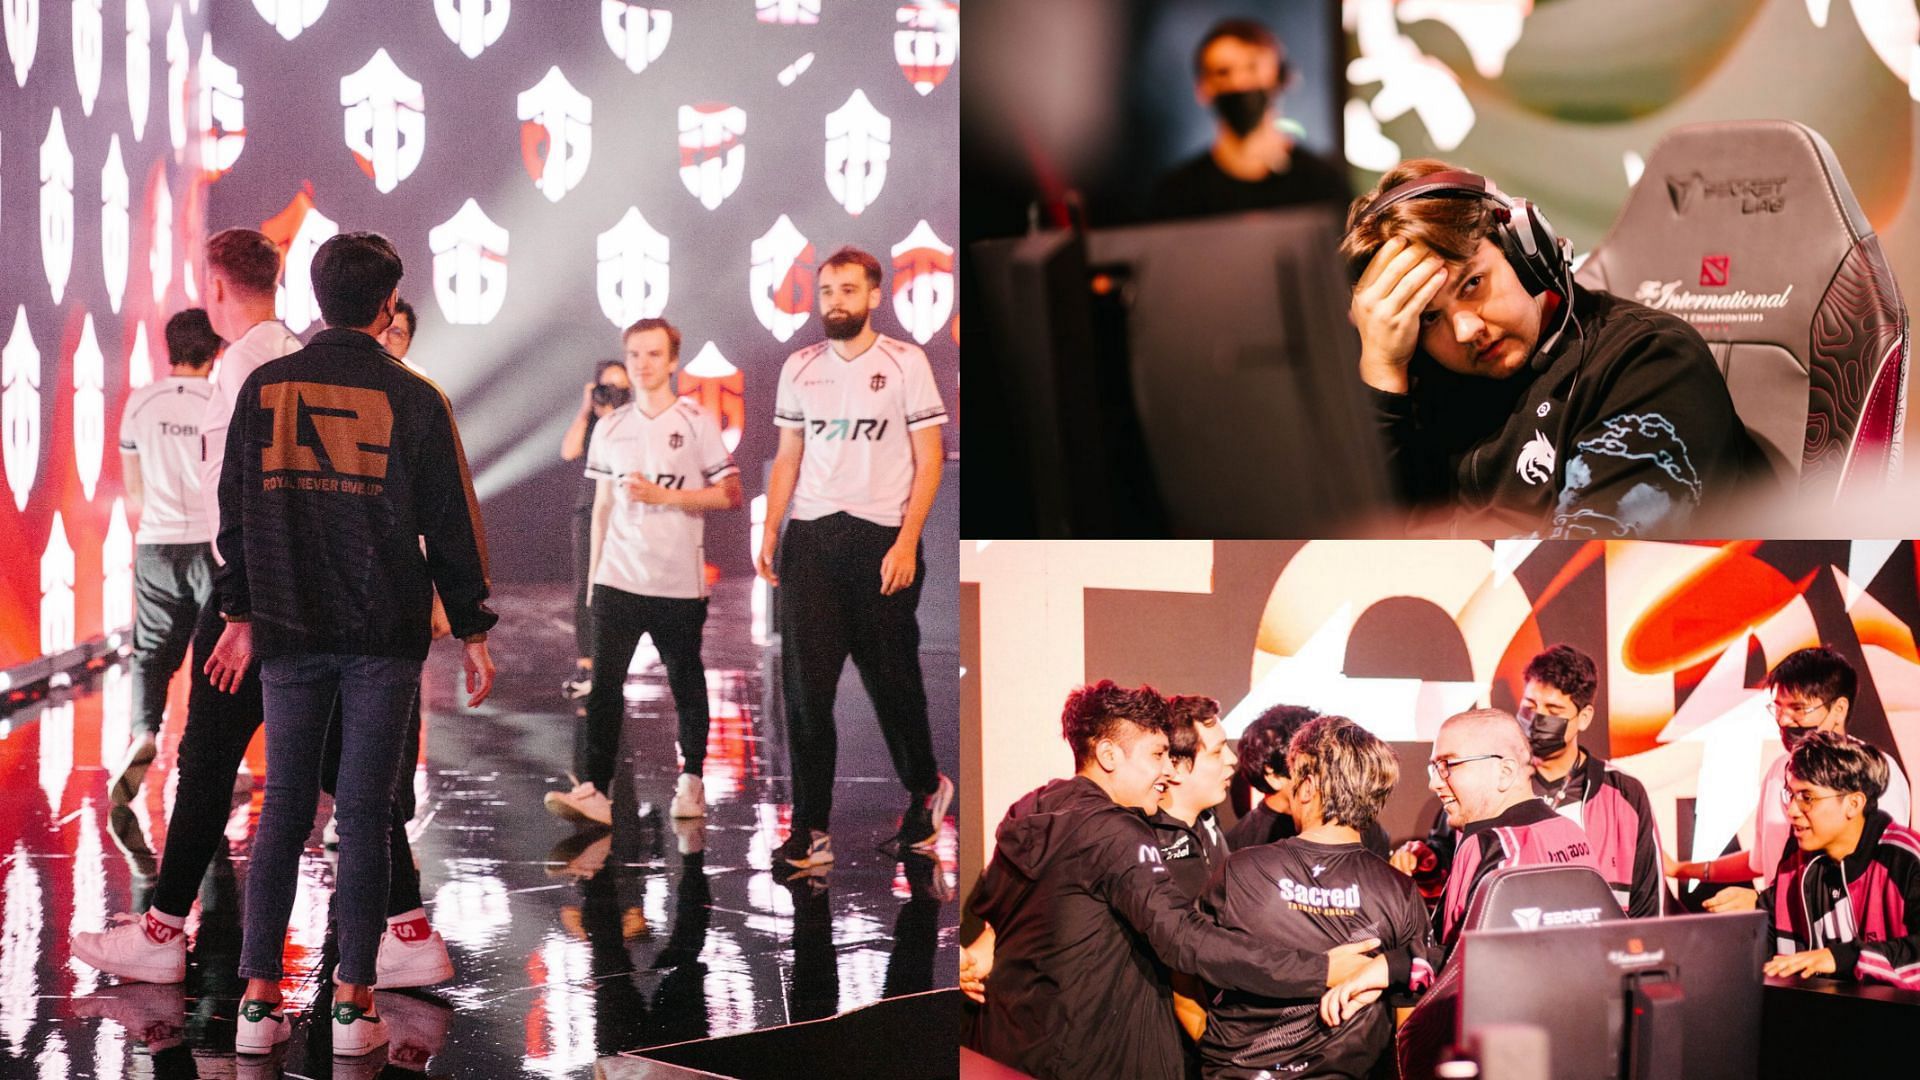 DOTA 2 The International 11 playoffs recap Day 1 sees the longest main stage TI match, Spirit crashing out, and more